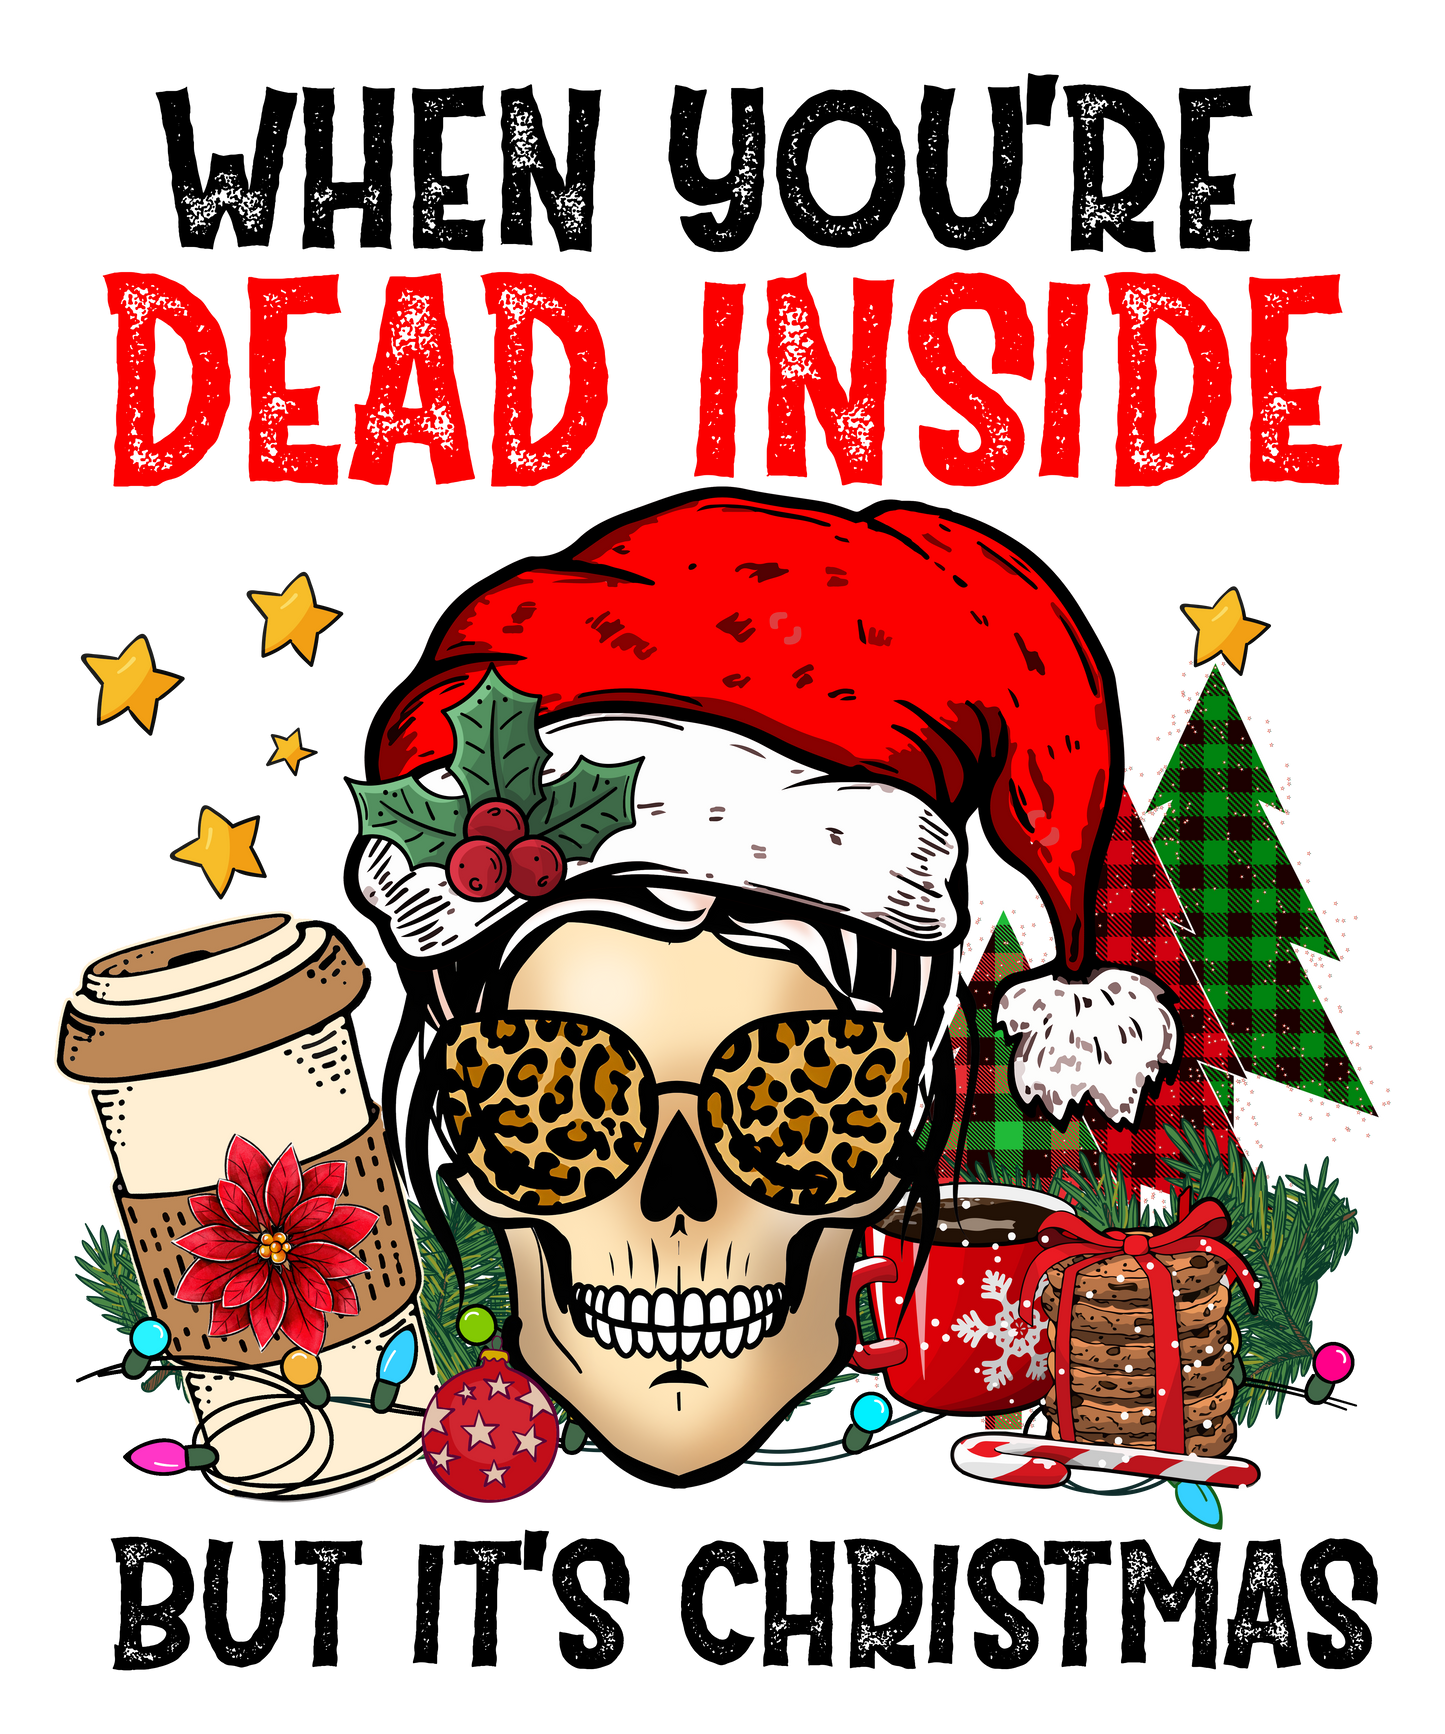 WHEN YOUR DEAD INSIDE BUT IT'S CHRISTMAS